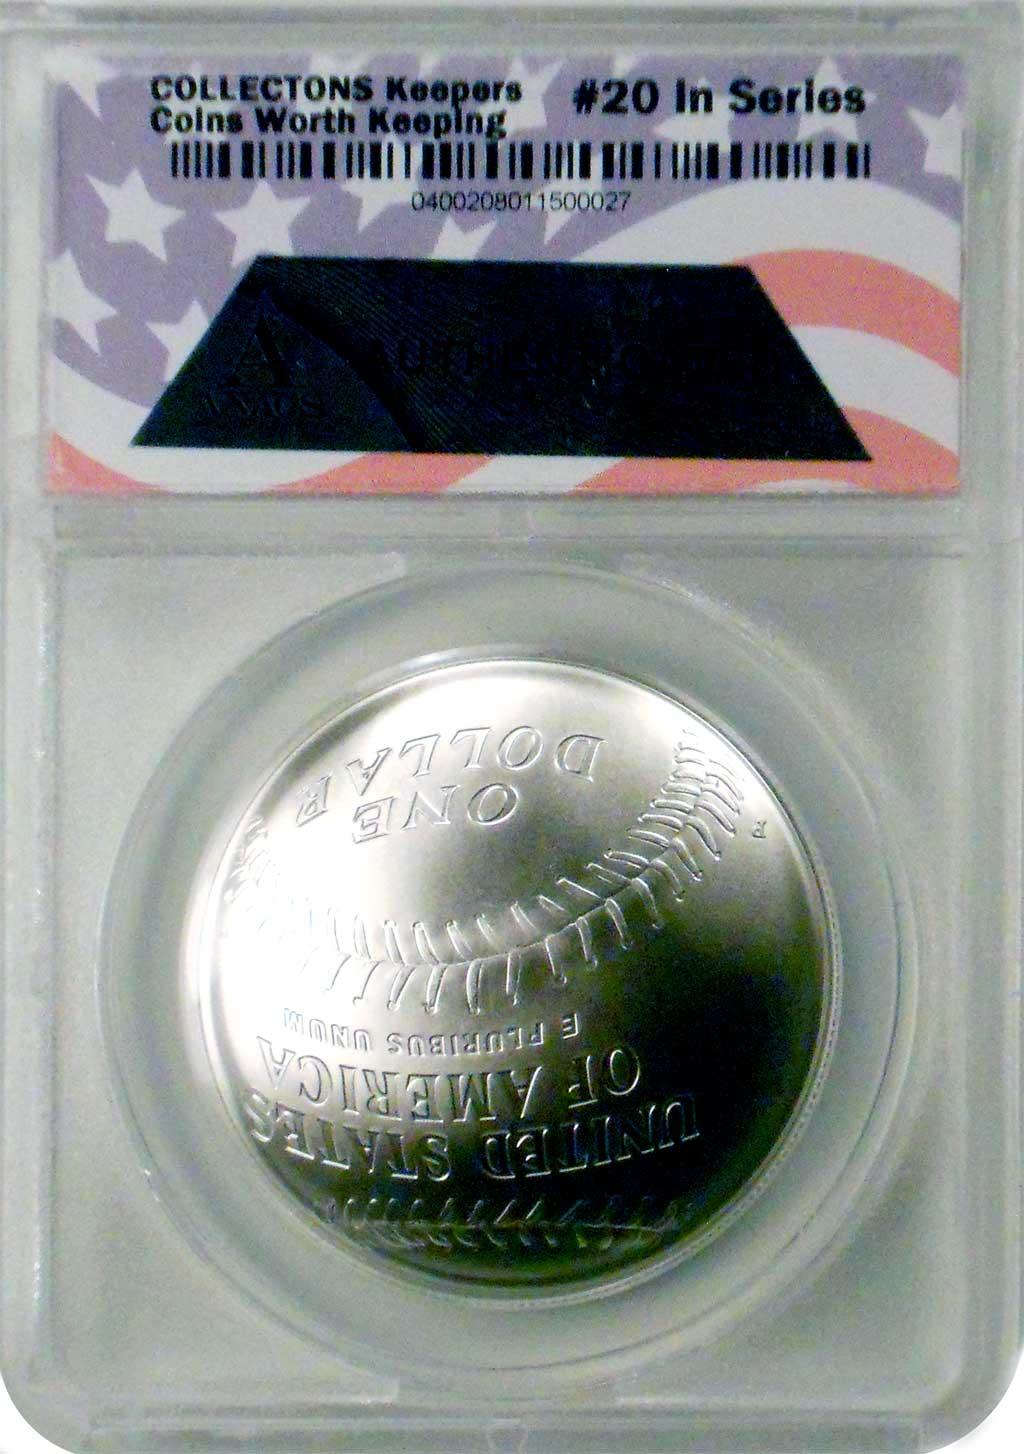 CollecTons Keepers #20: 2014-P National Baseball Hall of Fame Brilliant Uncirculated Commemorative Silver Dollar Certified in Exclusive ANACS Brilliant Uncirculated Holder